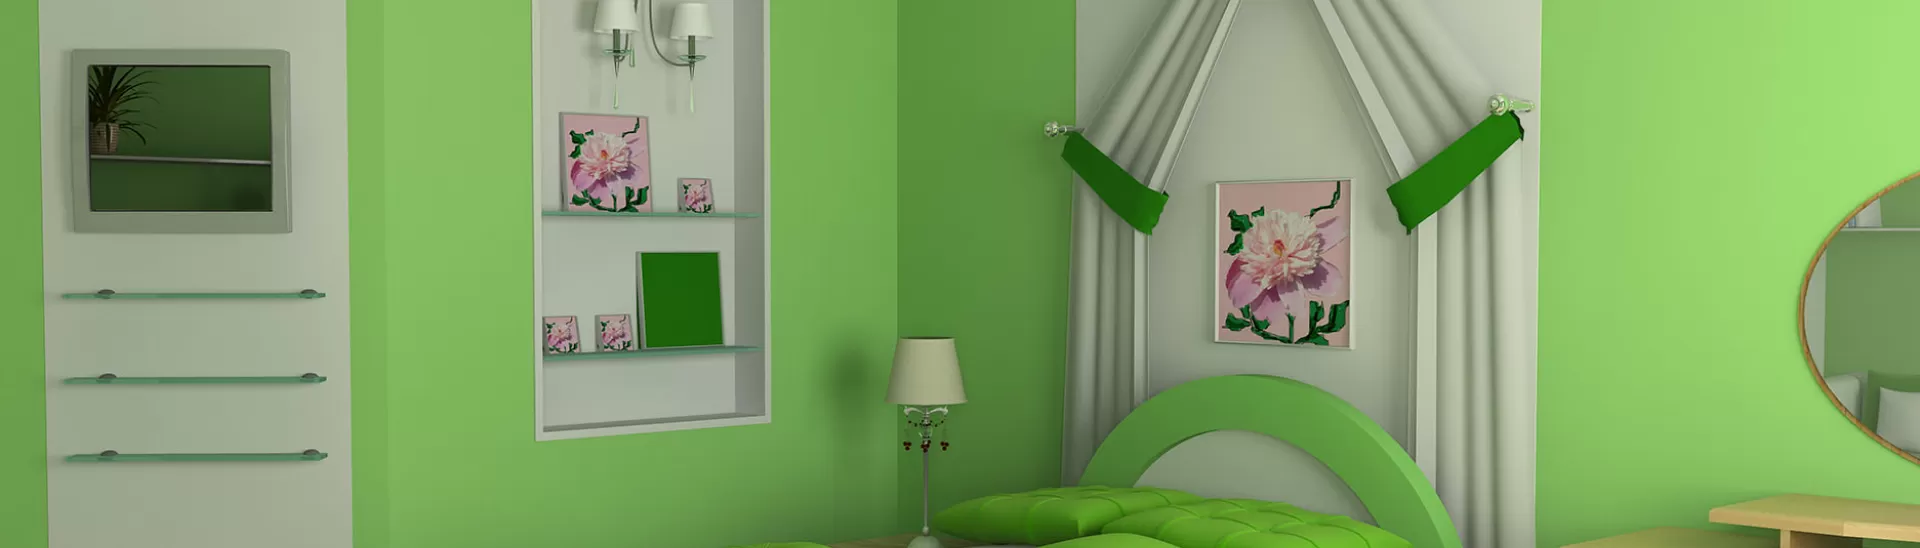 Wall Paint Design Ideas for Your Children's Bedroom | Nerolac